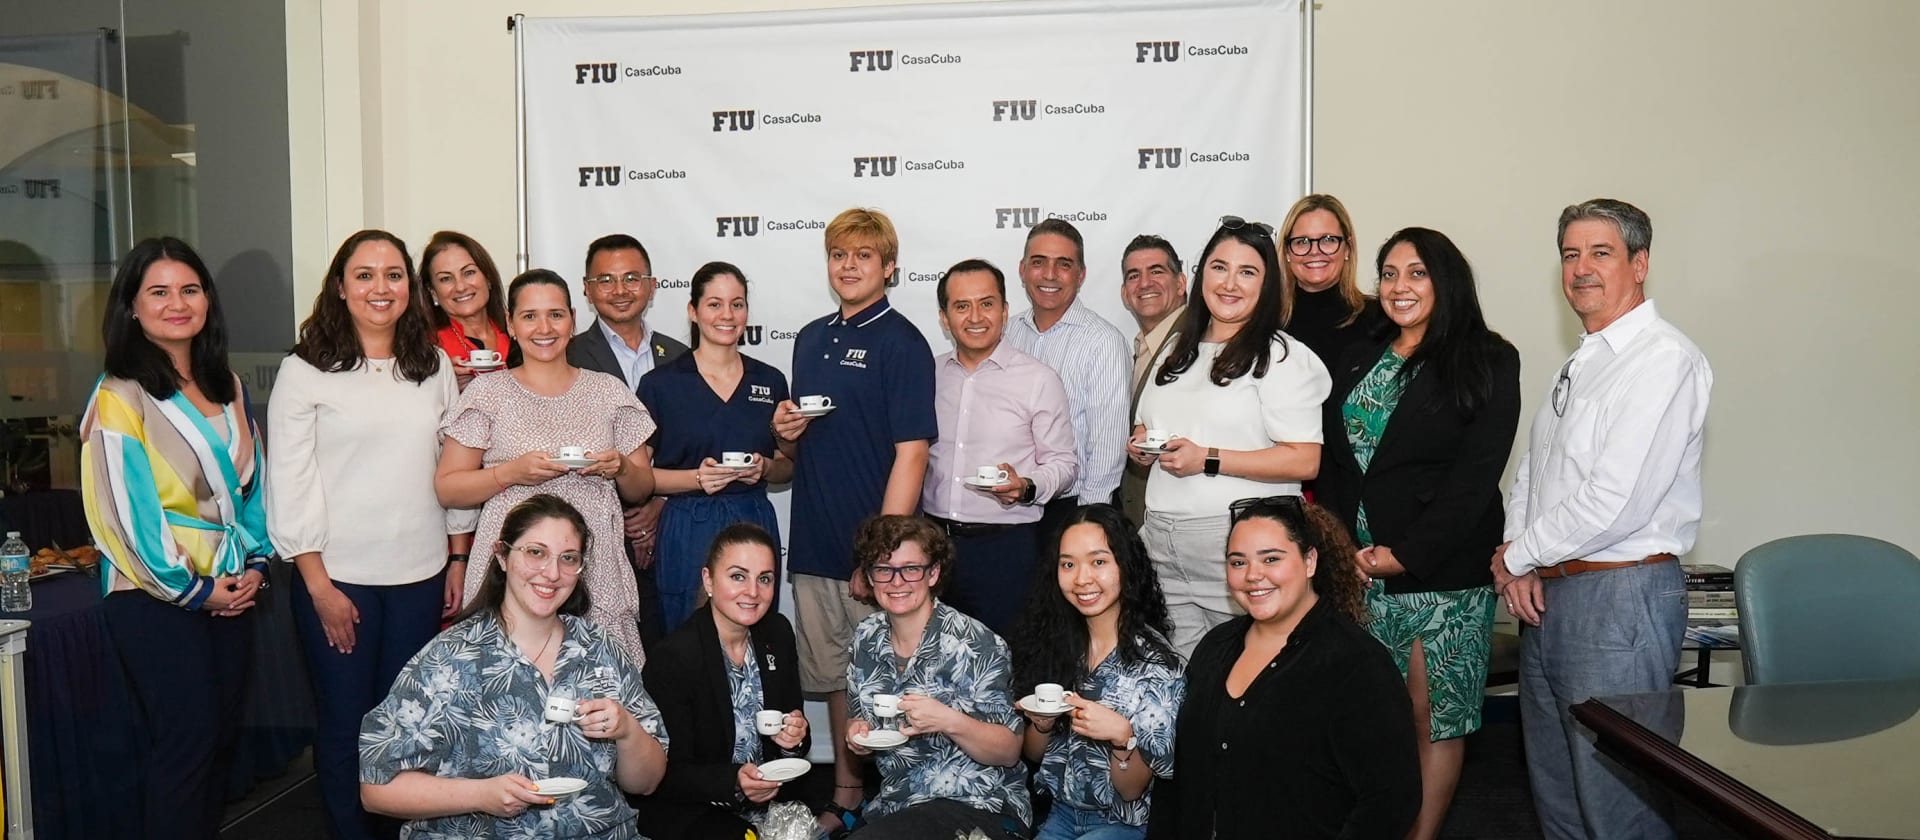 Café Bustelo, FIU CasaCuba, FIU Chaplin School of Hospitality & Tourism Management and FIU Foundation executives and students from the FIU student club The Coffee Guild share a cafecito in celebration of $1.25 million dollar gift.